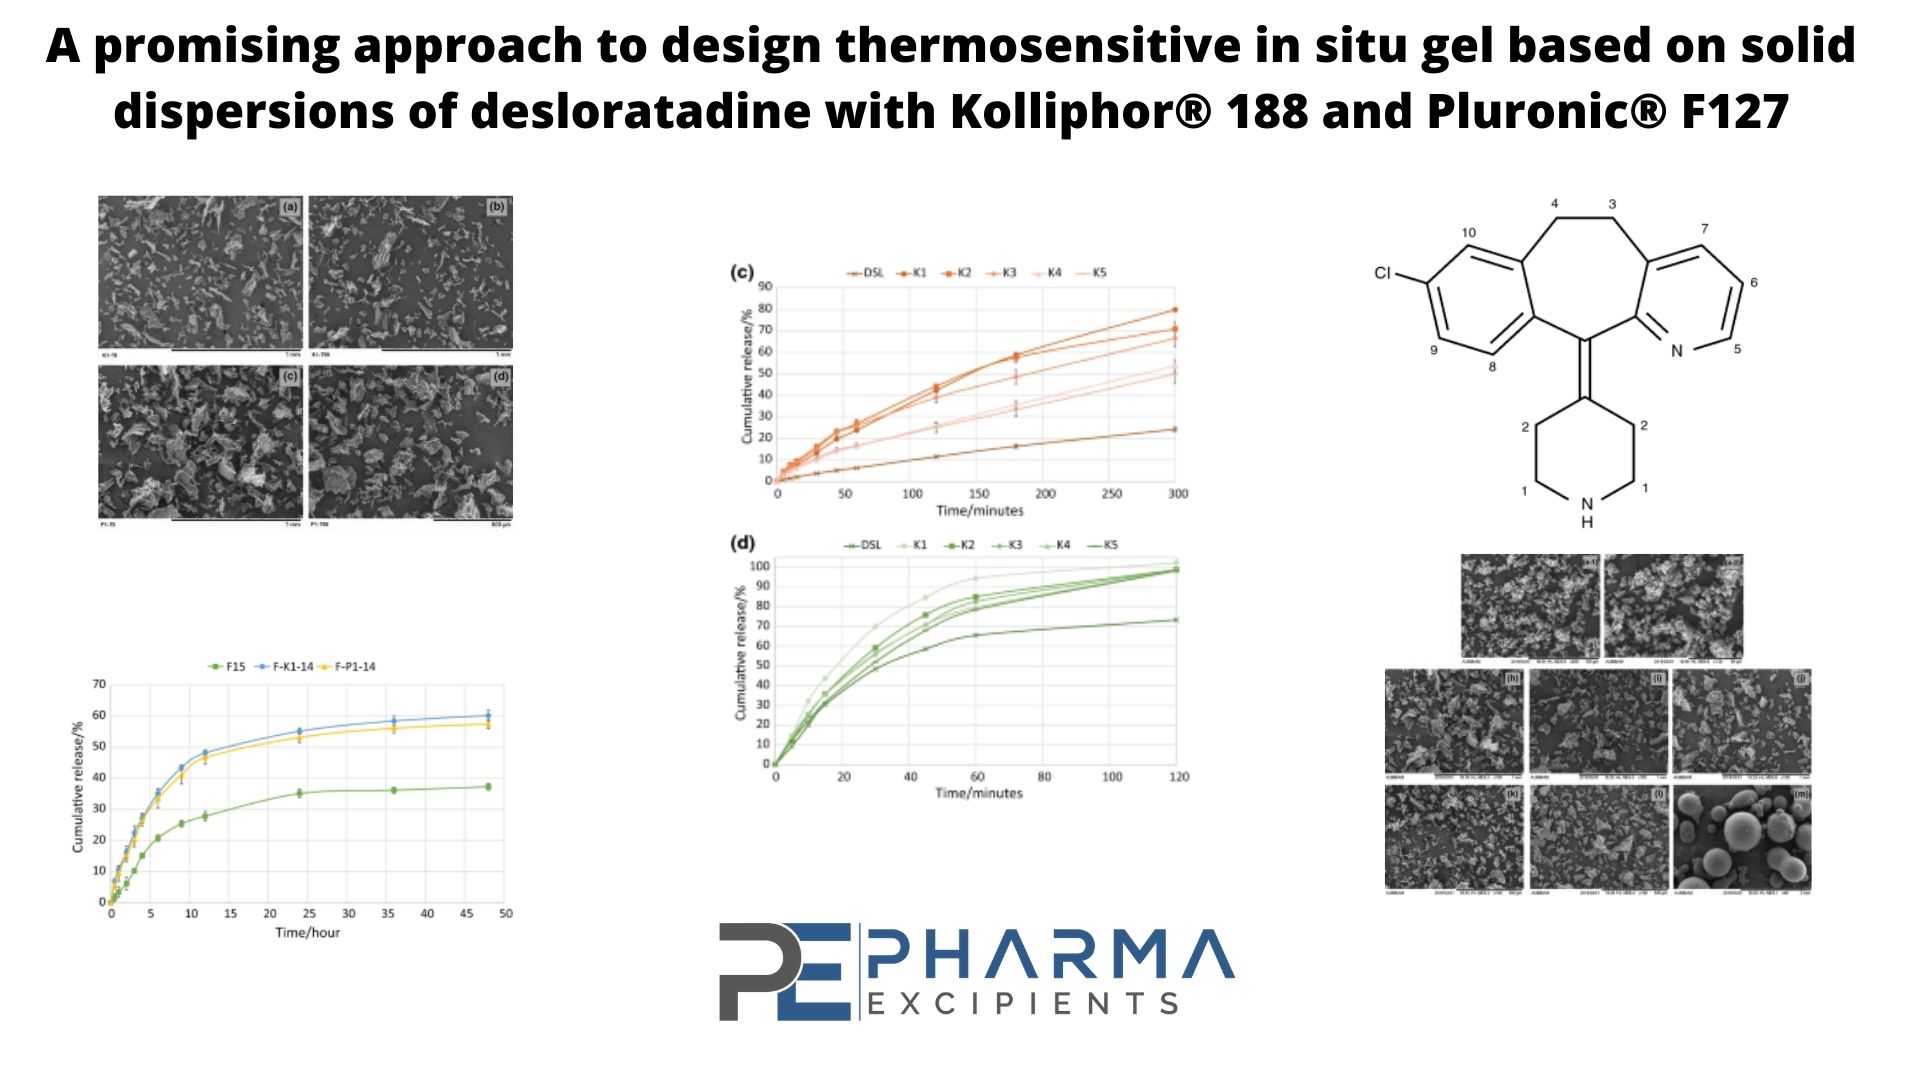 graphical abstract of A promising approach to design thermosensitive in situ gel based on solid dispersions of desloratadine with Kolliphor® 188 and Pluronic® F127